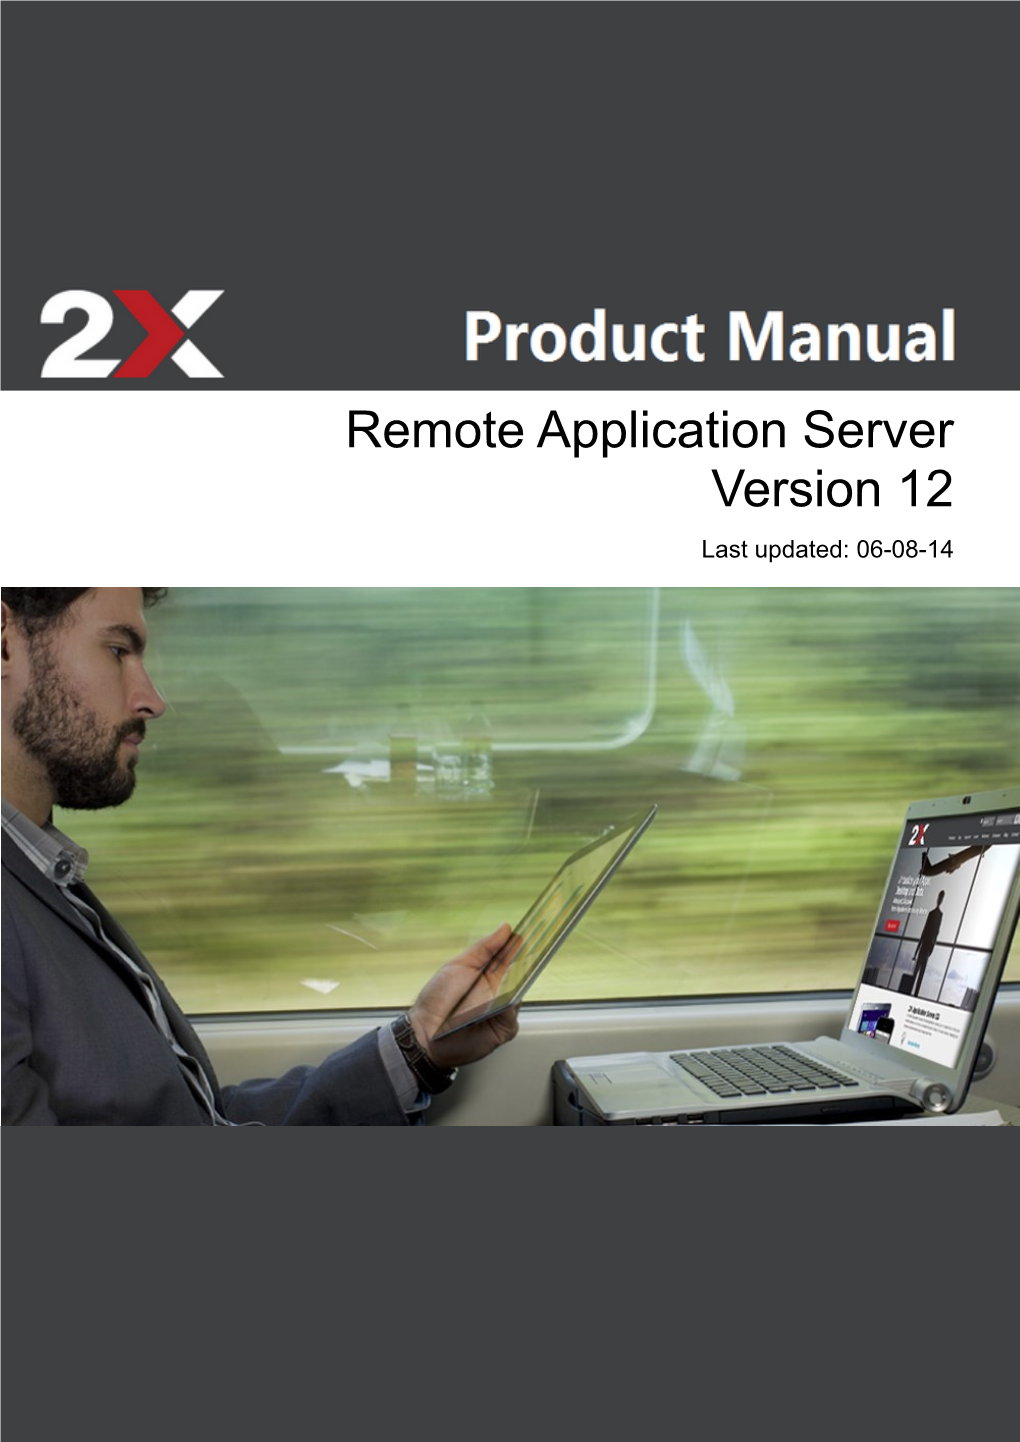 Remote Application Server Version 12 Has Been Rebranded and Focuses on Added Support to the the Improved Client Manager